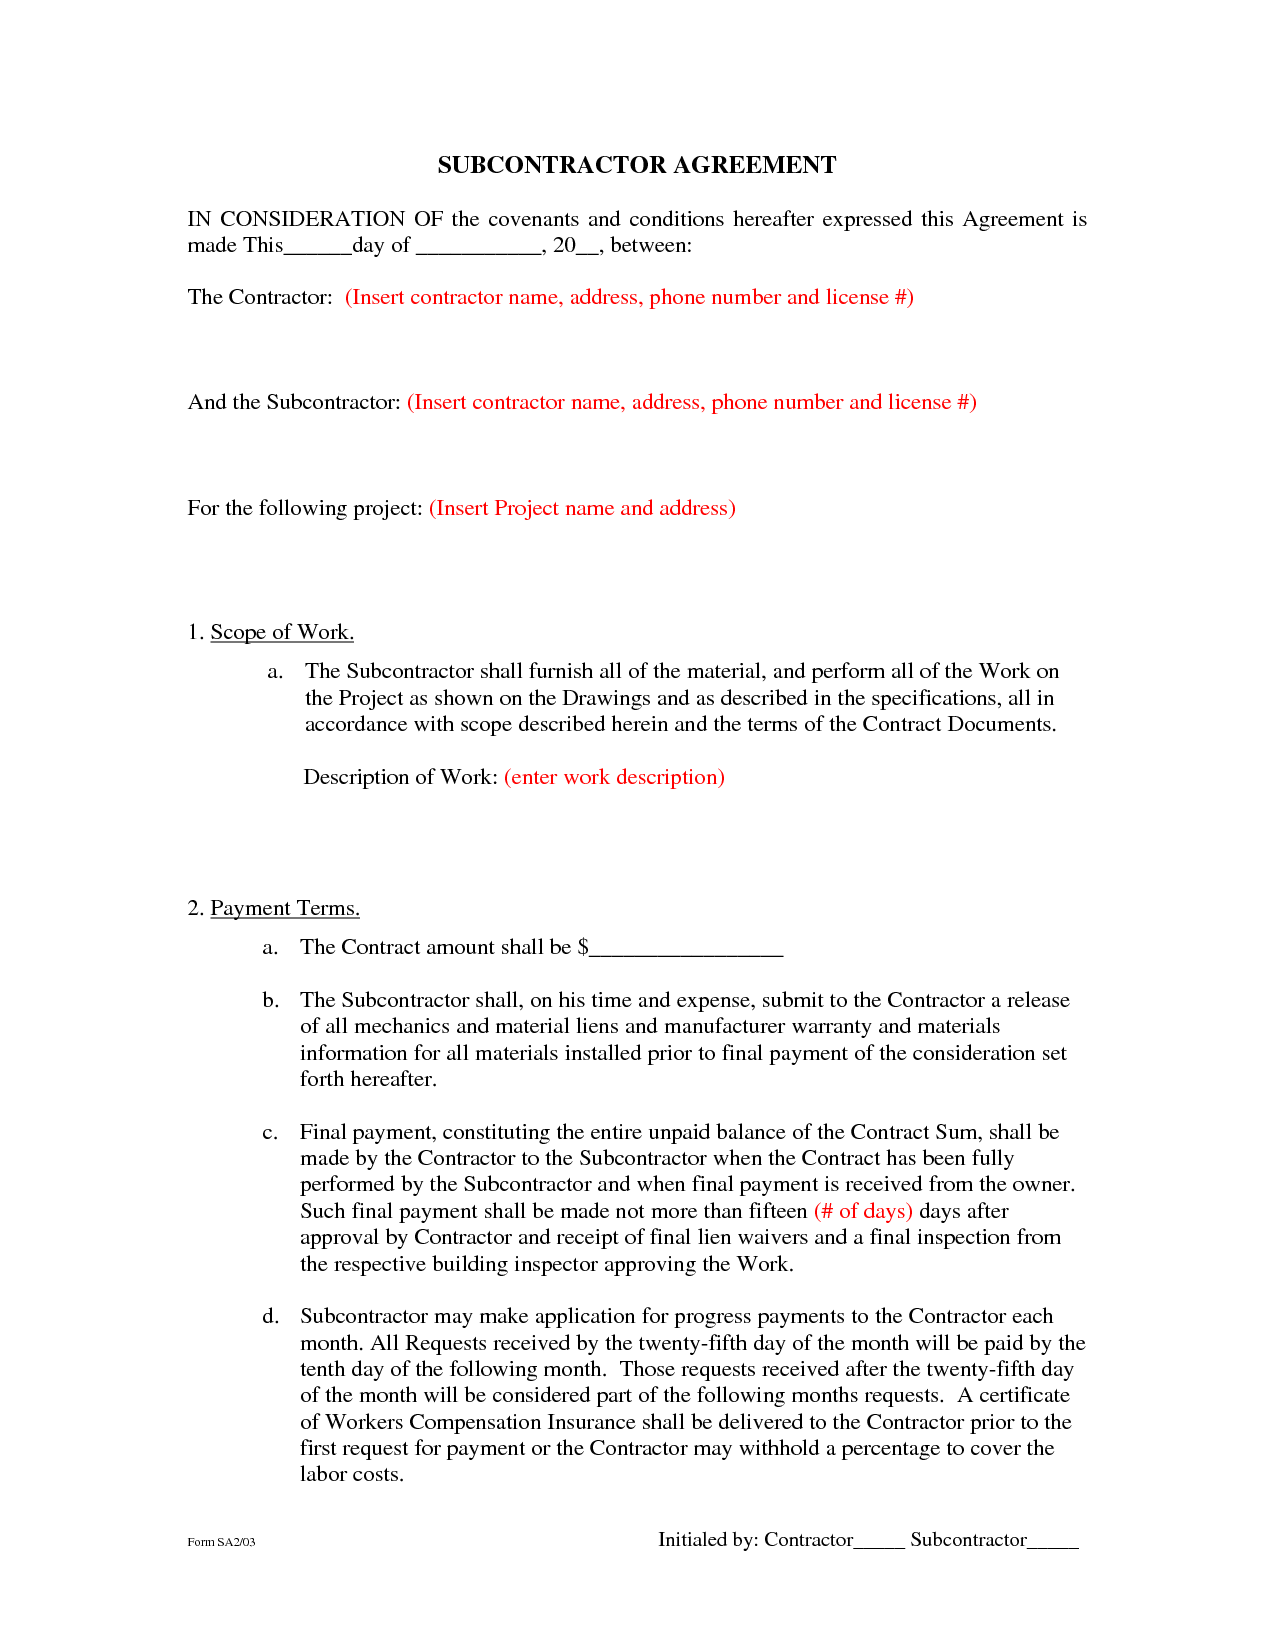 Subcontractor Agreement Template Free. free subcontractor 